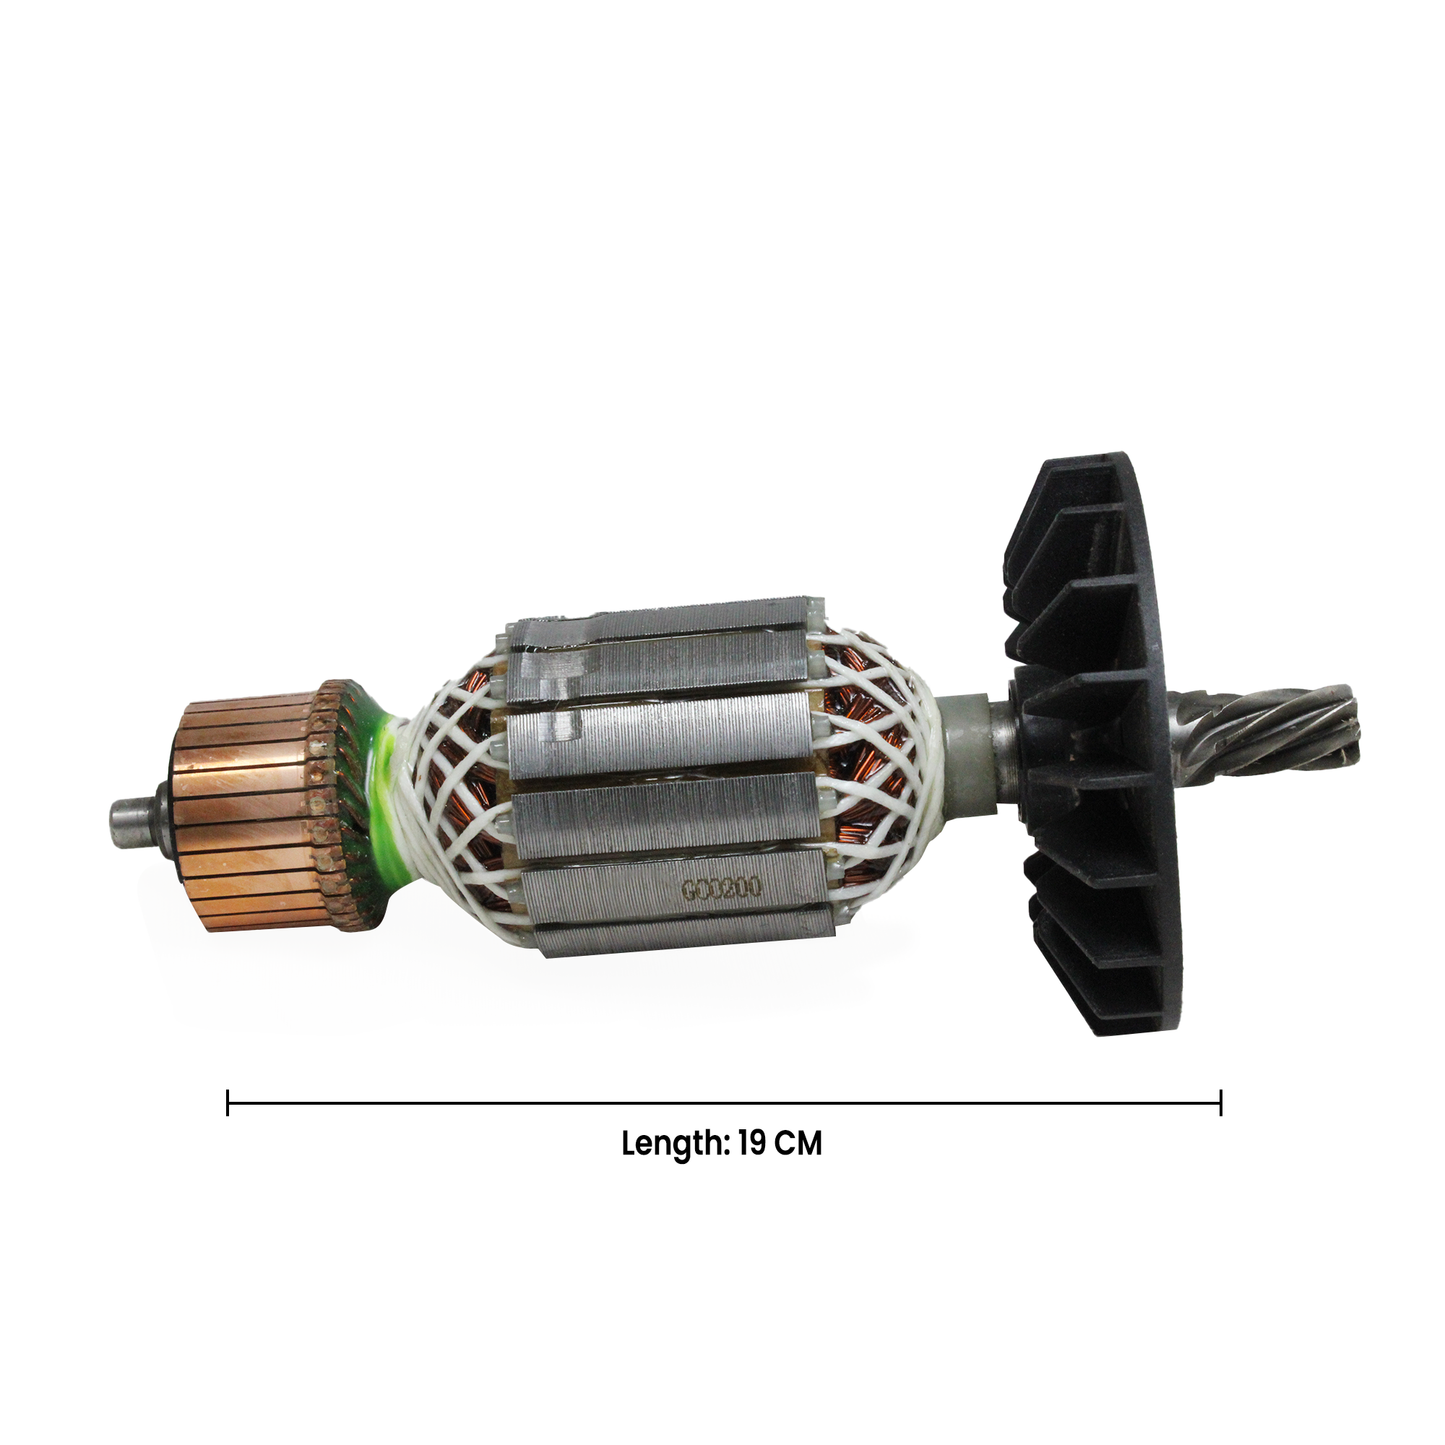 AEGON ACWFGC0200 Copper Armature - Compatible with Aegon ACM14, Bosch GCO 220, and Other Brands & Models